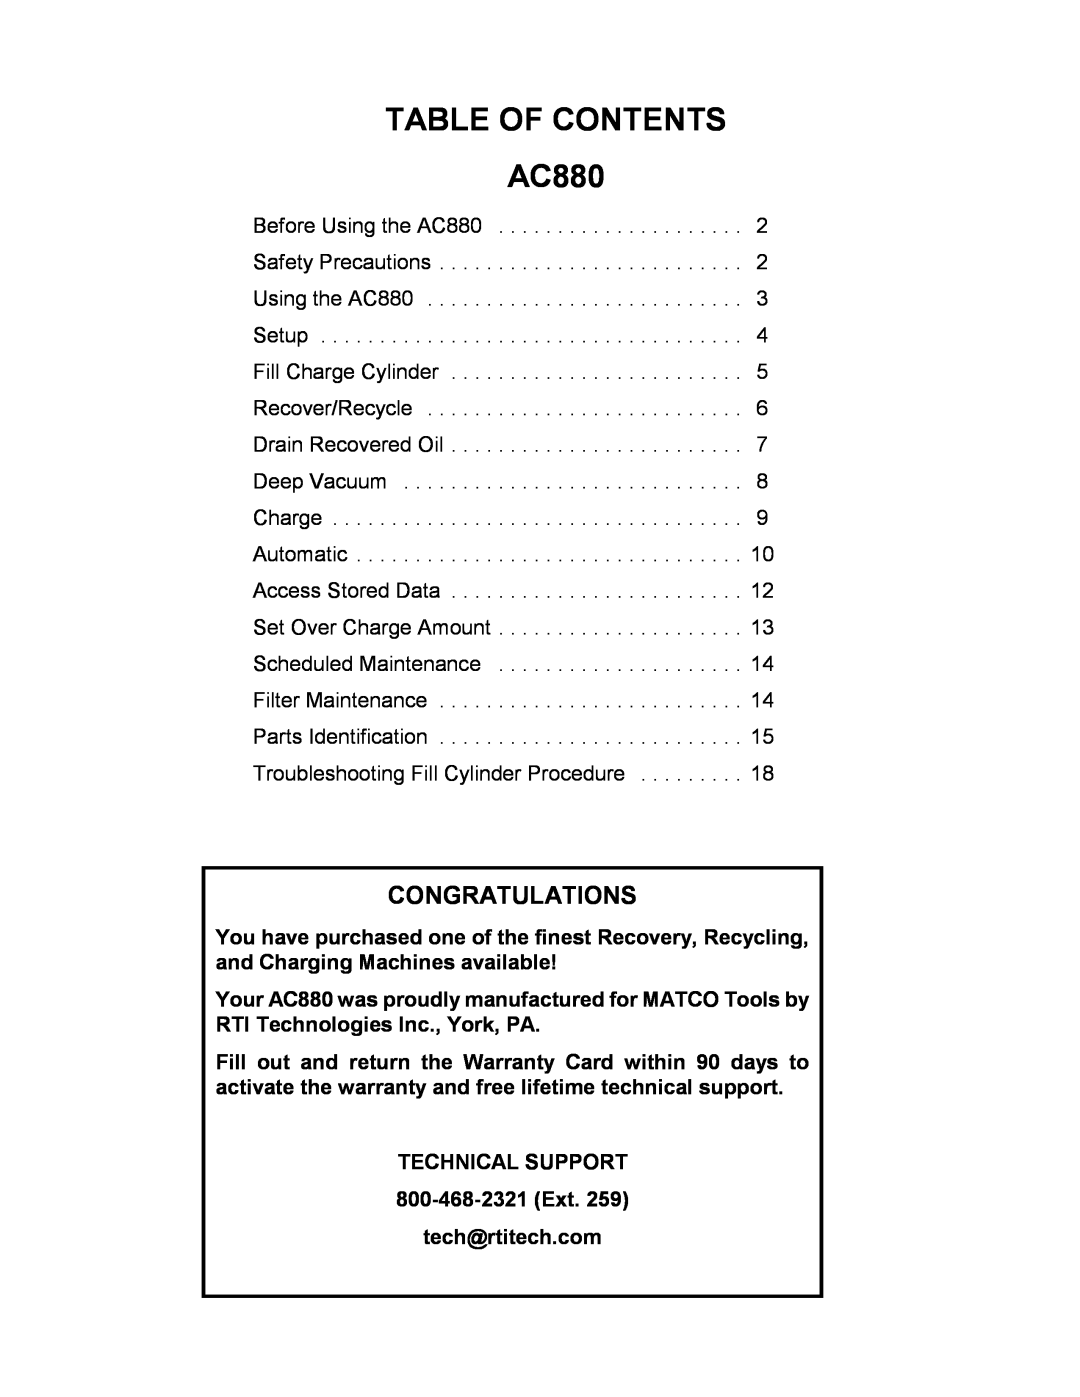 Sharp system manual TABLE OF CONTENTS AC880, Congratulations 